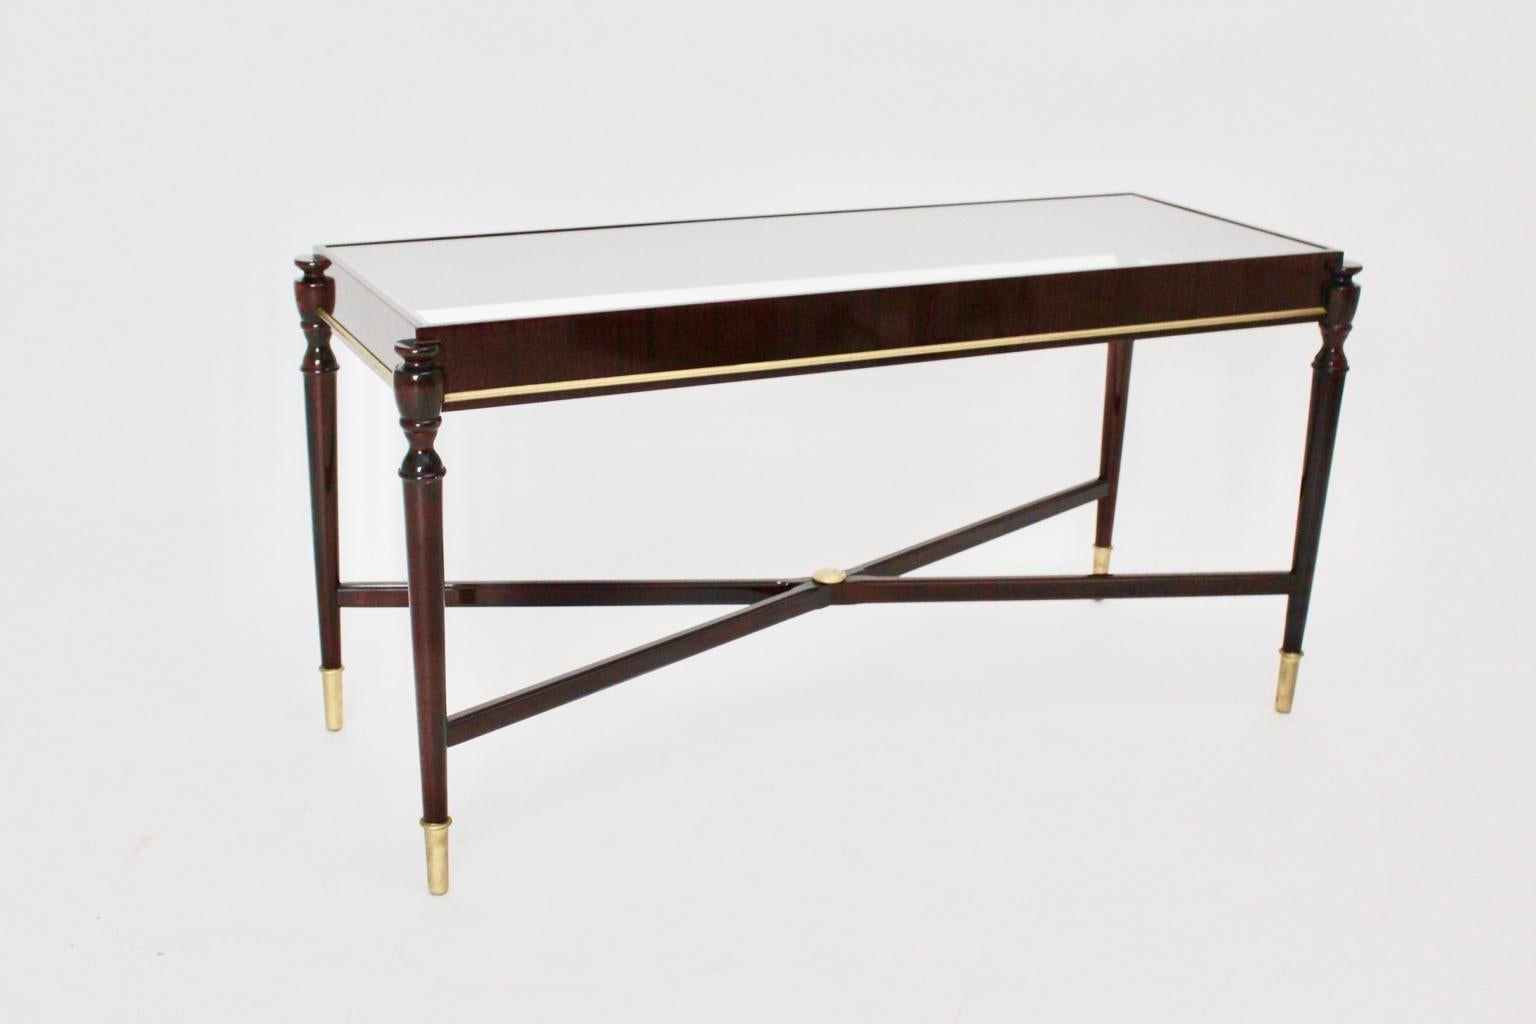 The coffee table attributed to Paolo Buffa circa 1940 was made of solid mahogany and veneered mahogany, lacquered.
Also the coffee table features golden details and a clear glass top without chips.

Very good vintage condition

Approximate measures: